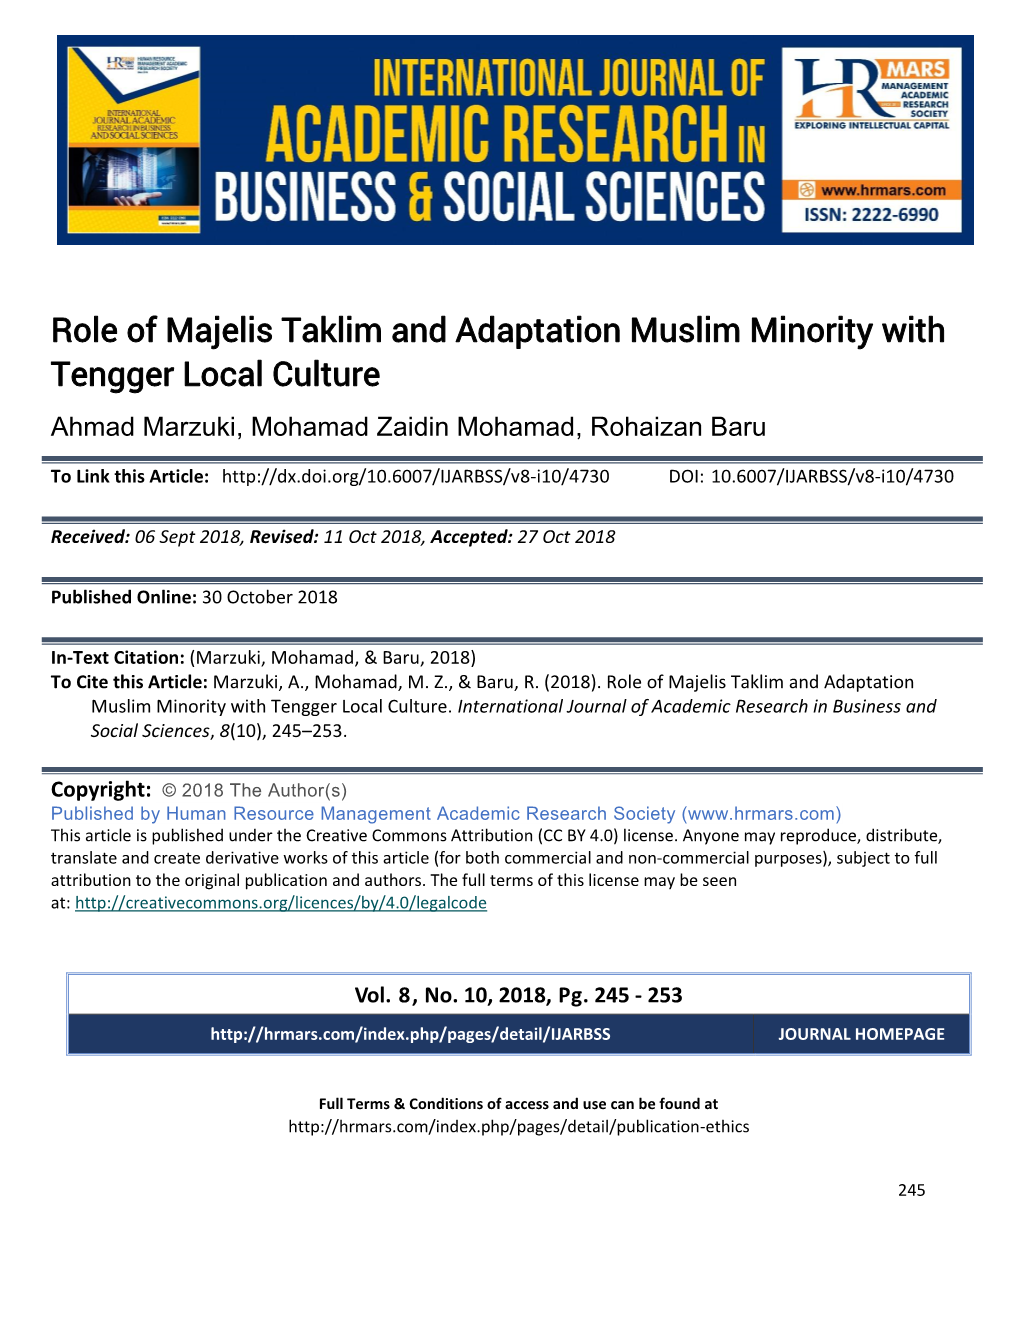 Role of Majelis Taklim and Adaptation Muslim Minority with Tengger Local Culture